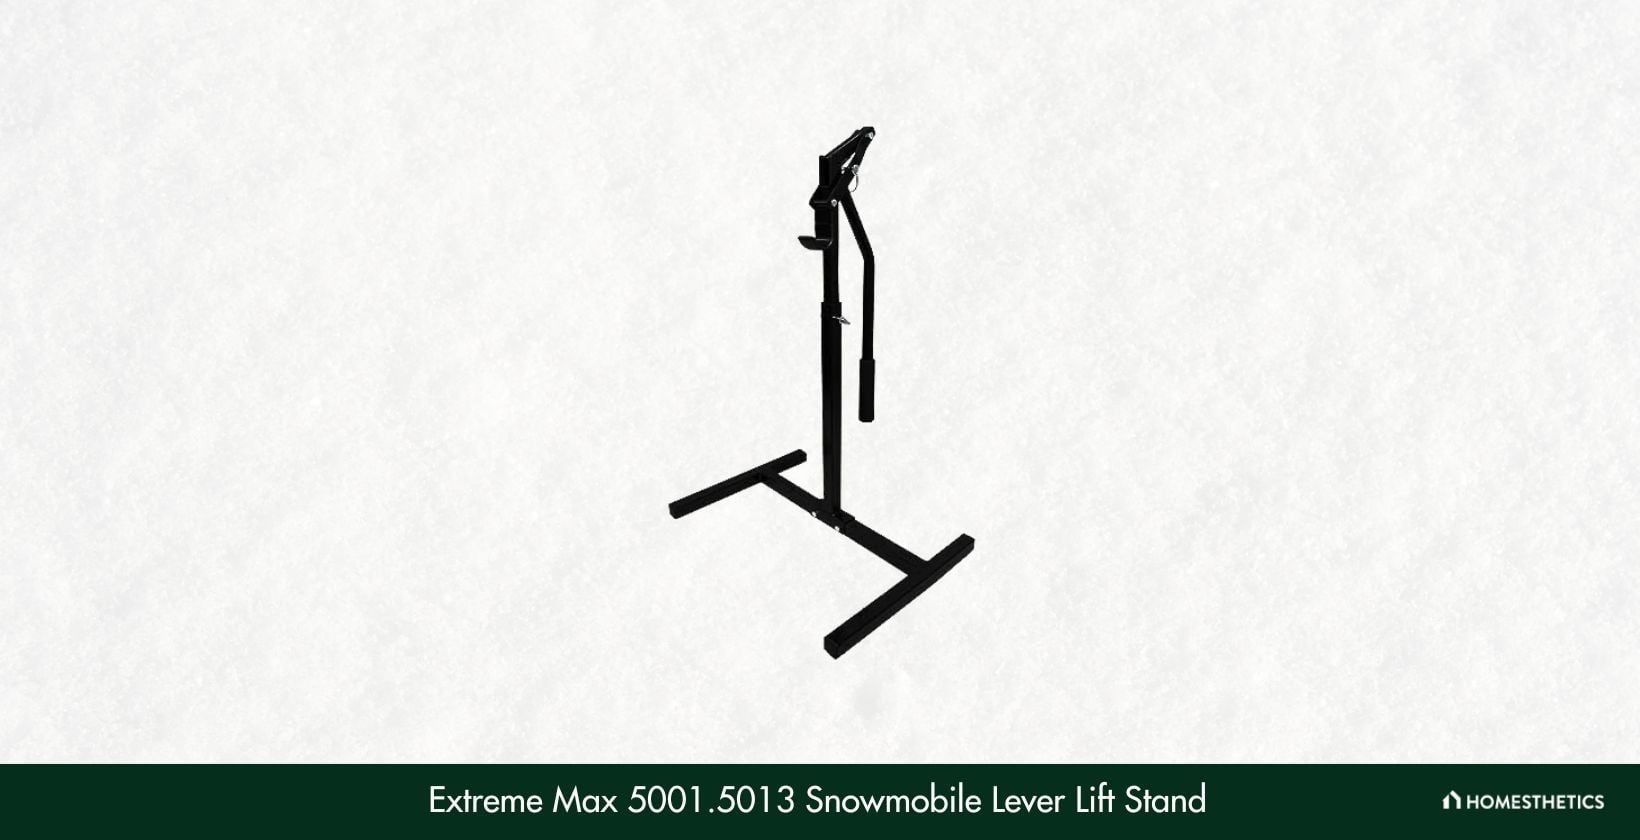 Extreme Max 5001.5013 Snowmobile Lever Lift Stand 1